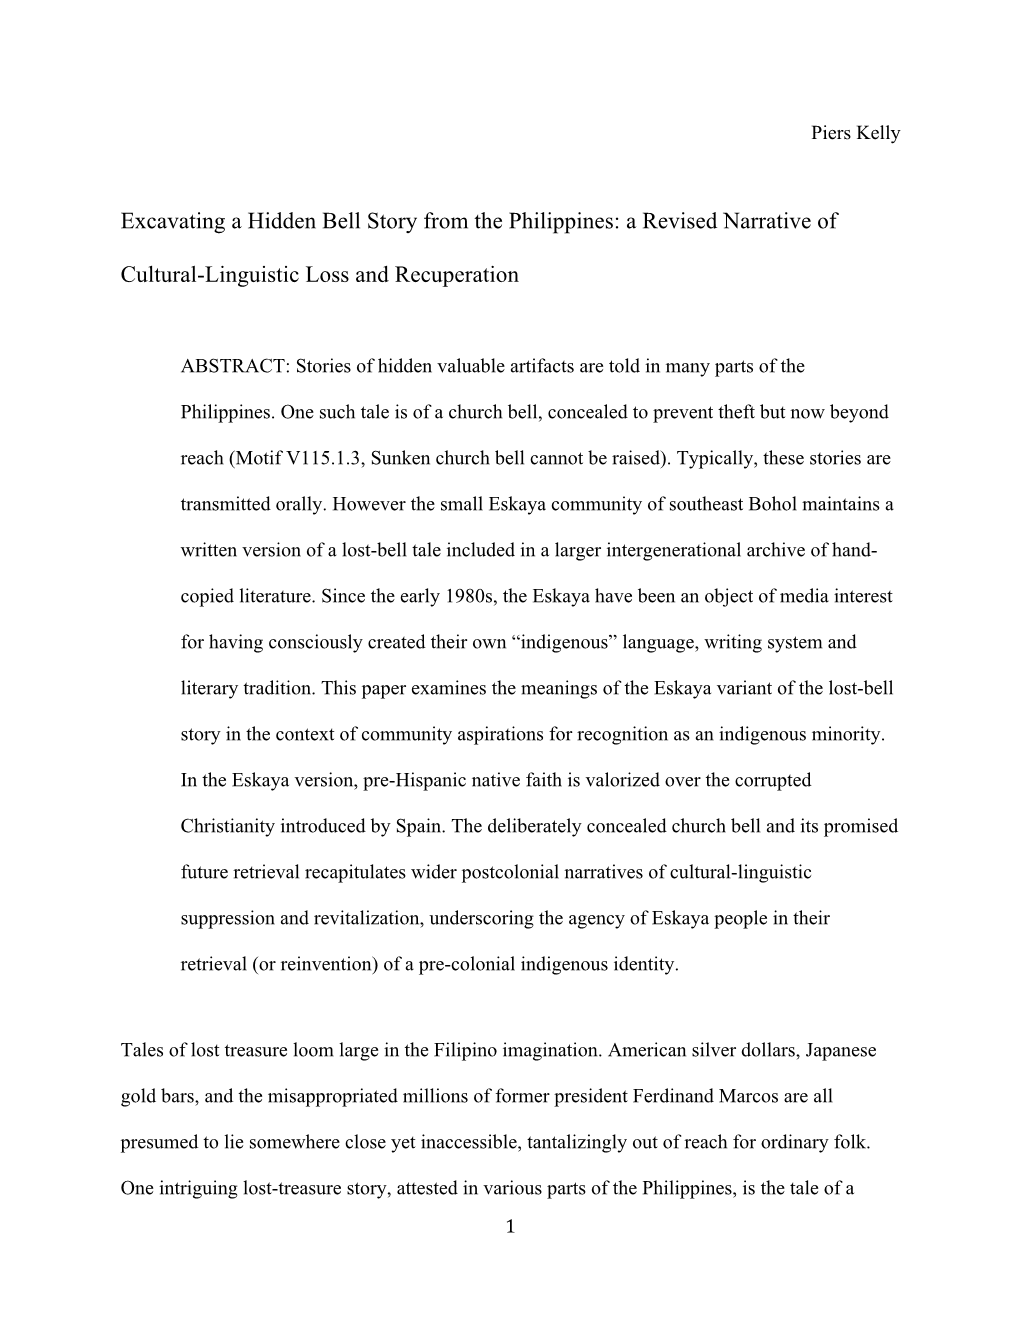 Excavating a Hidden Bell Story from the Philippines: a Revised Narrative Of